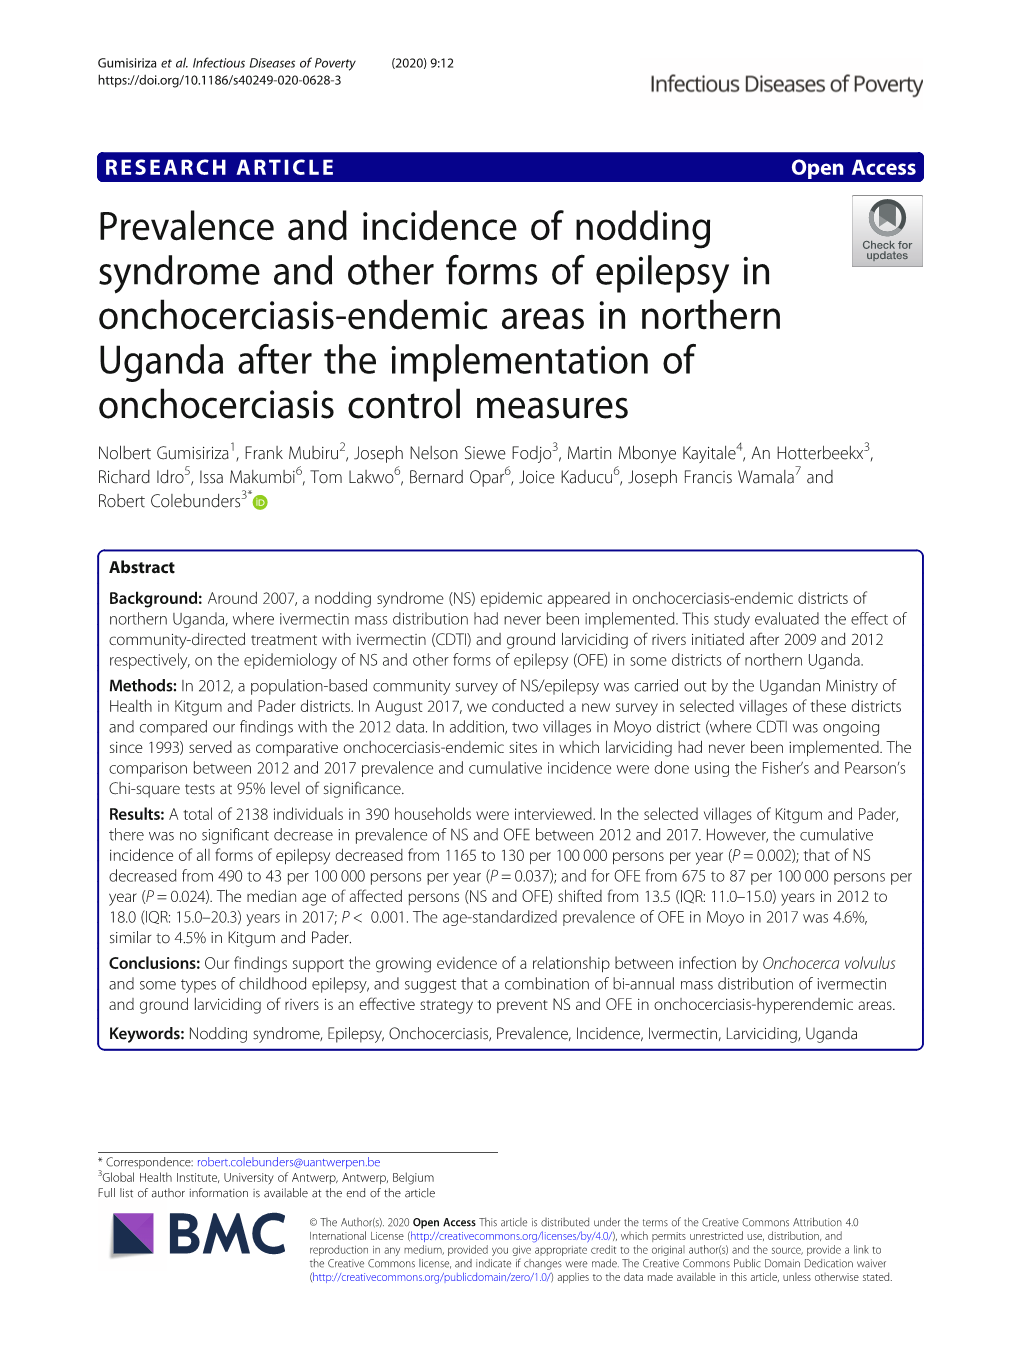 Prevalence and Incidence of Nodding